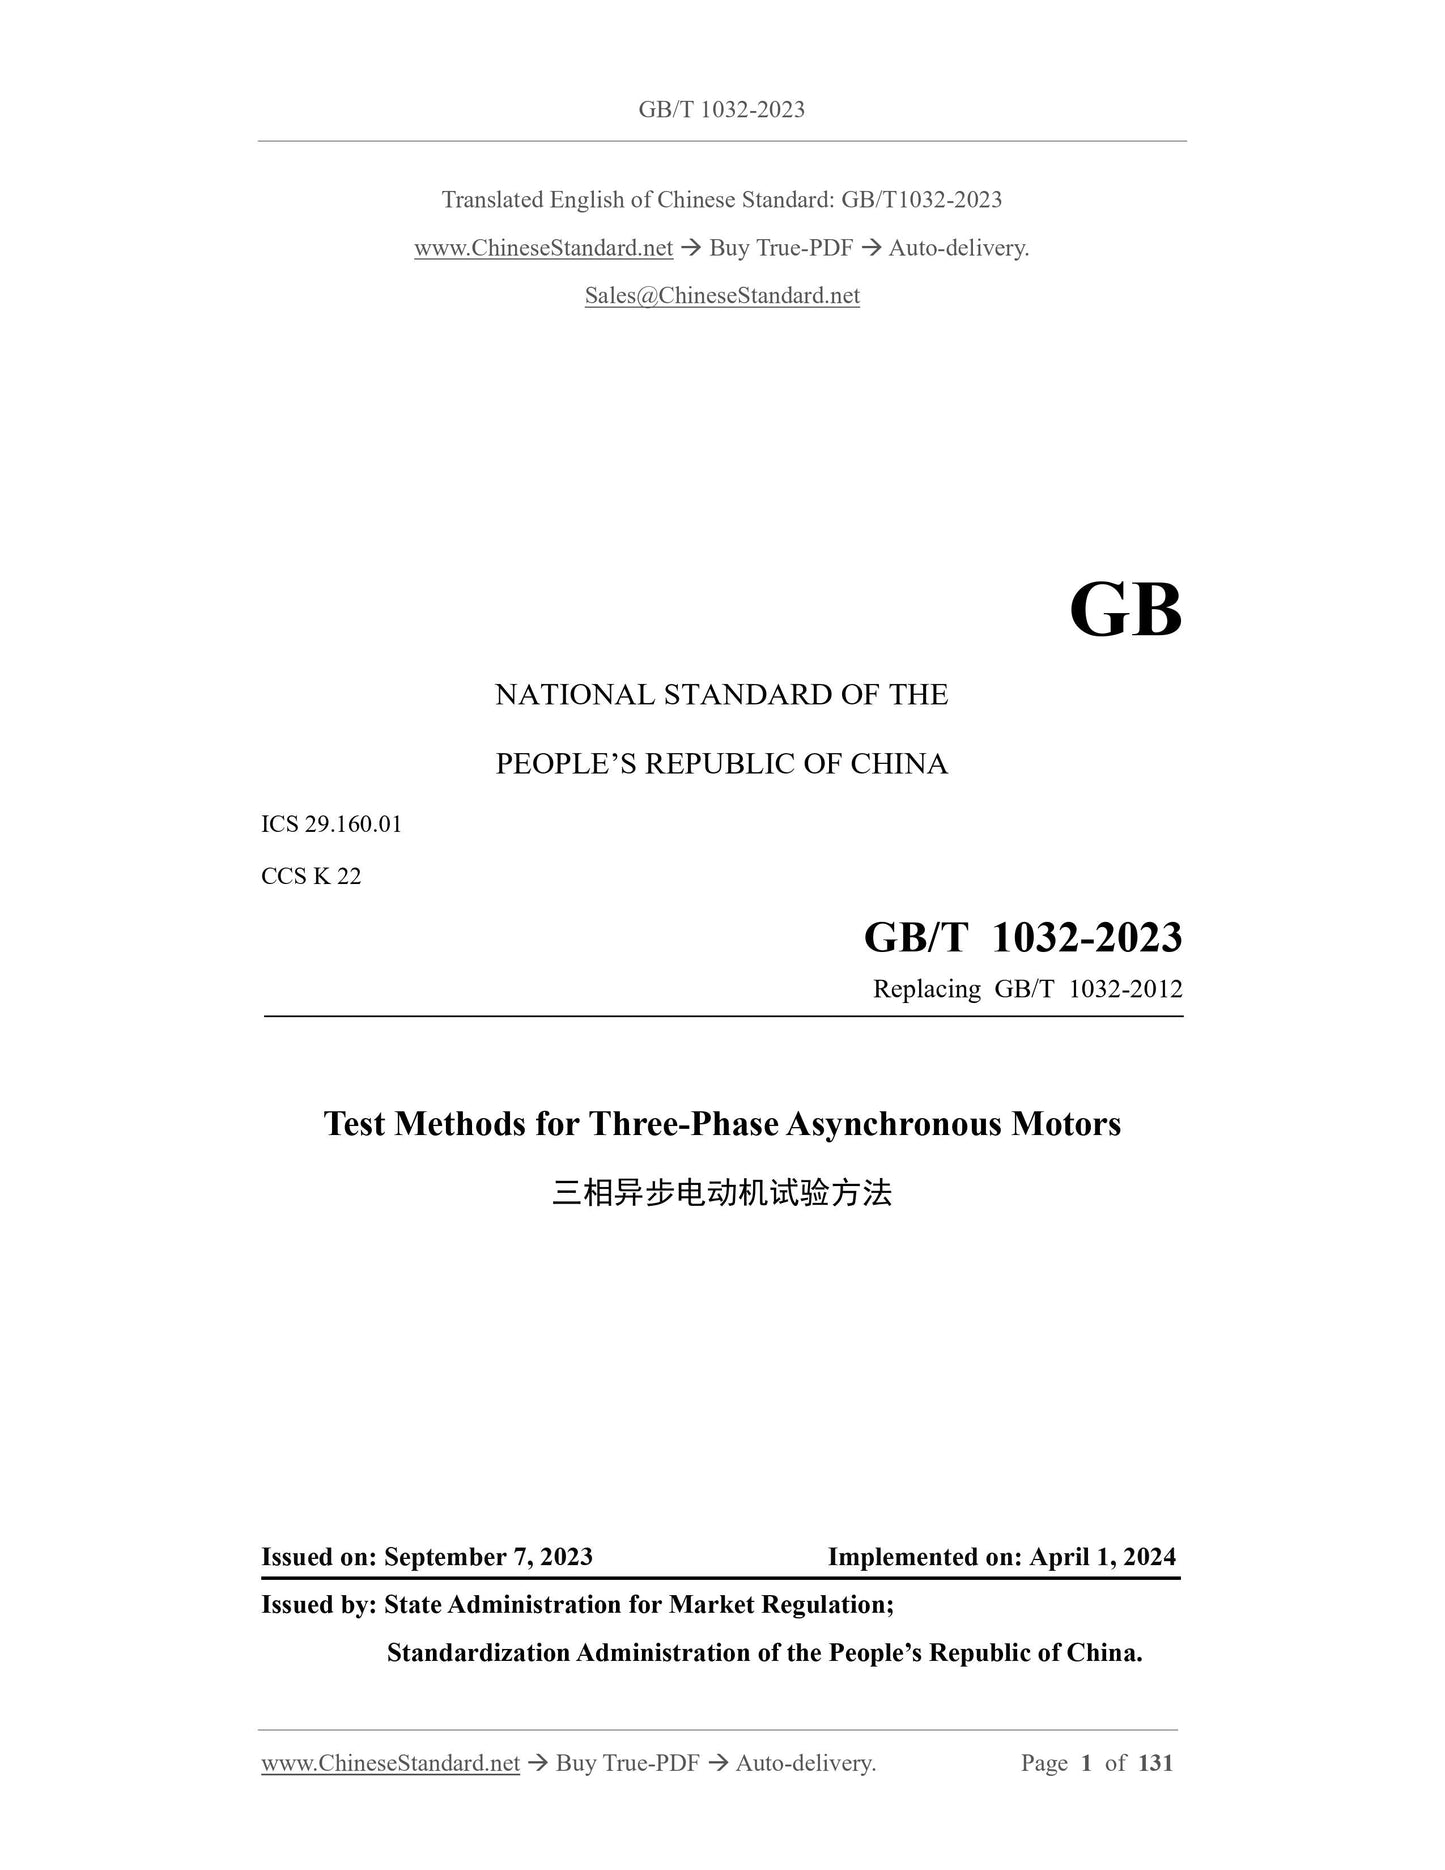 GB/T 1032-2023 Page 1